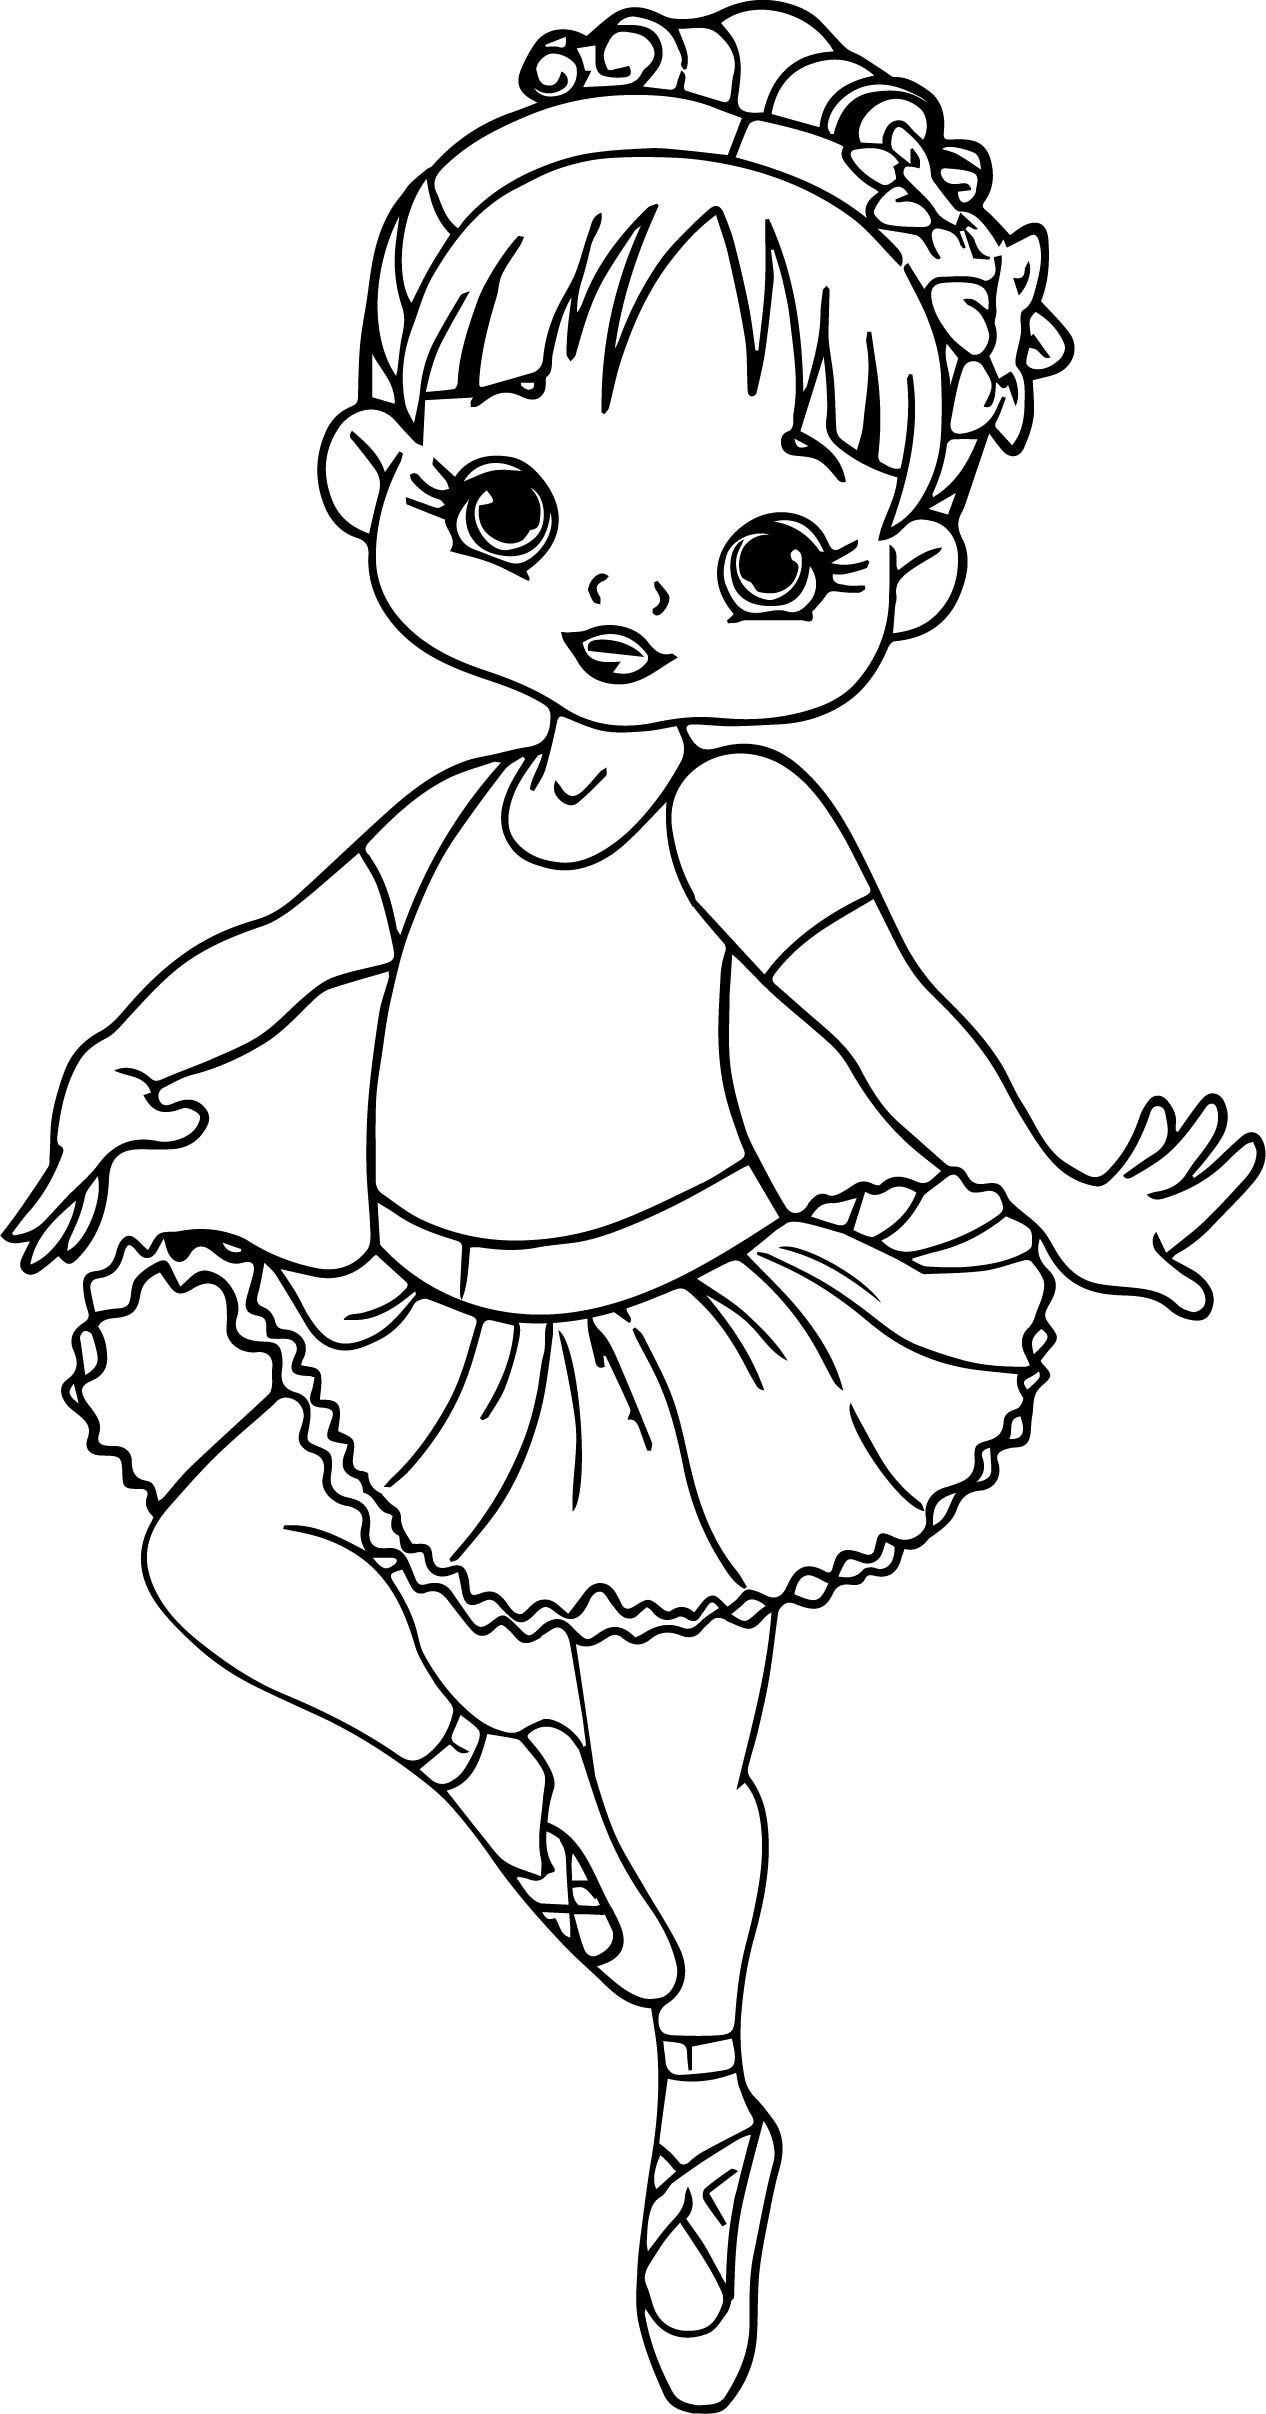 Coloring Book Pages Girls
 Ballerina Cartoon Girl Coloring Page